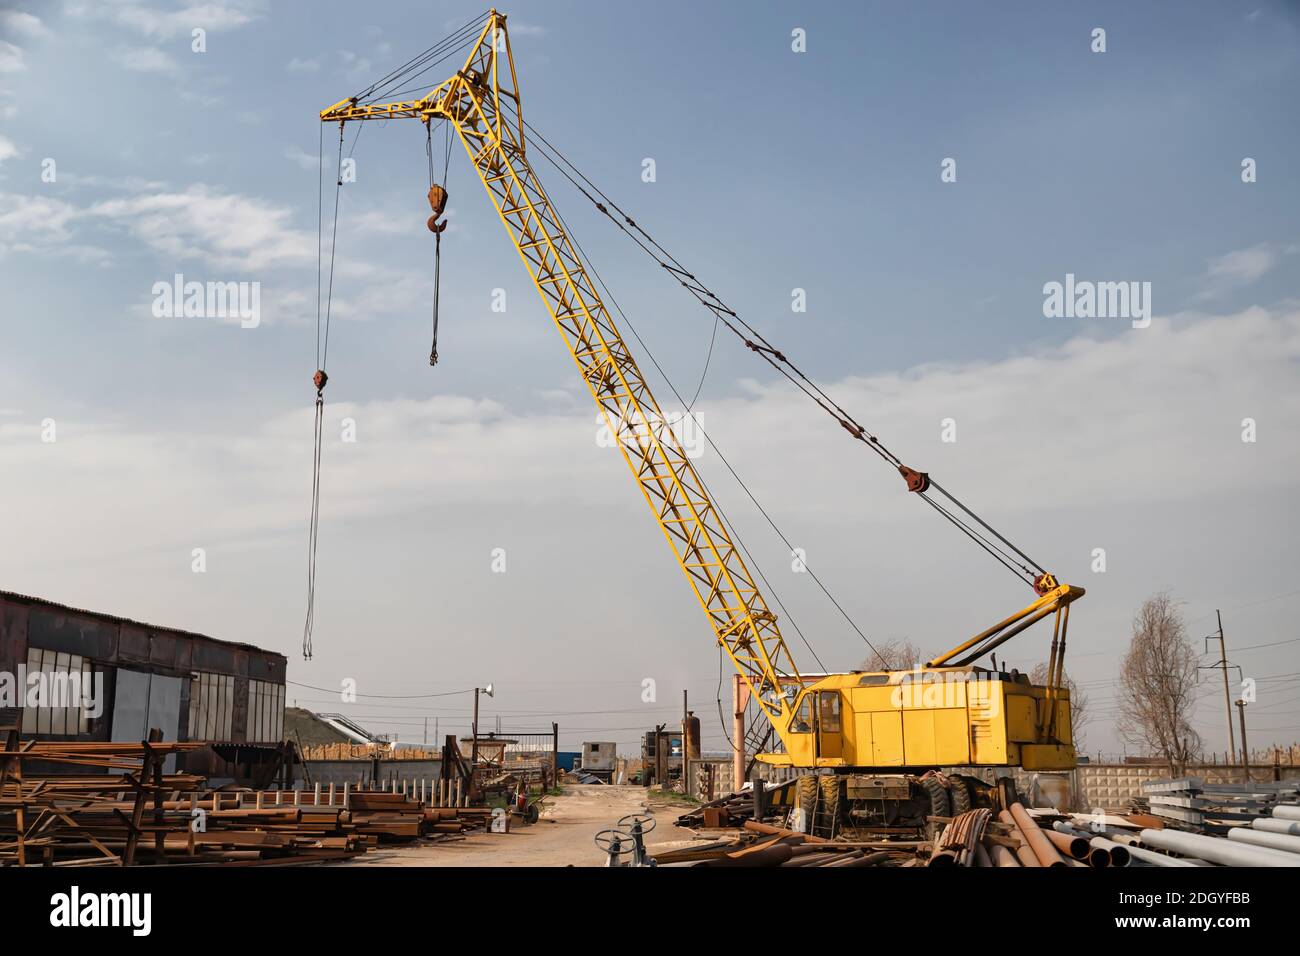 A large yellow crane stands on the basis of rolled metal Stock Photo